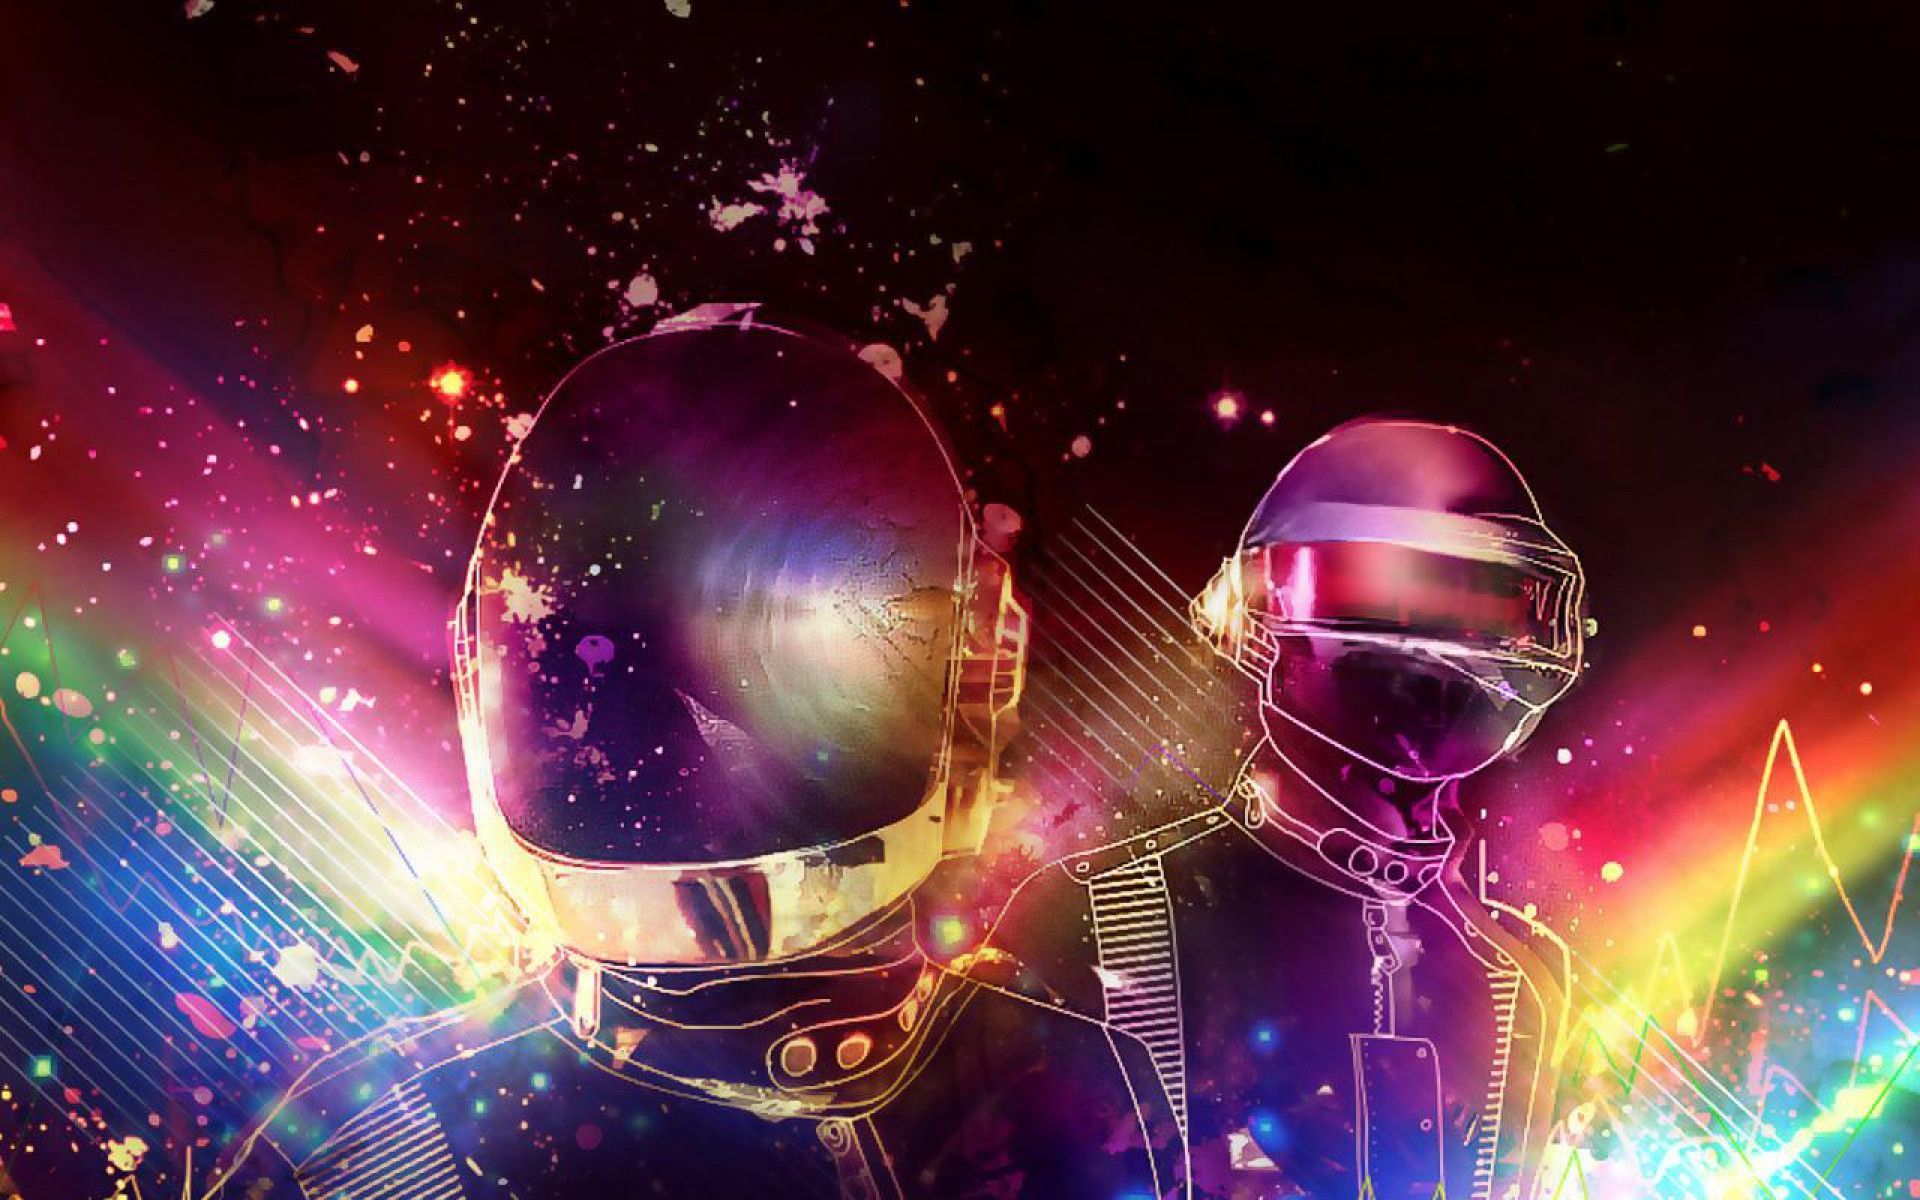 Daft Punk Wallpapers High Quality Download Free